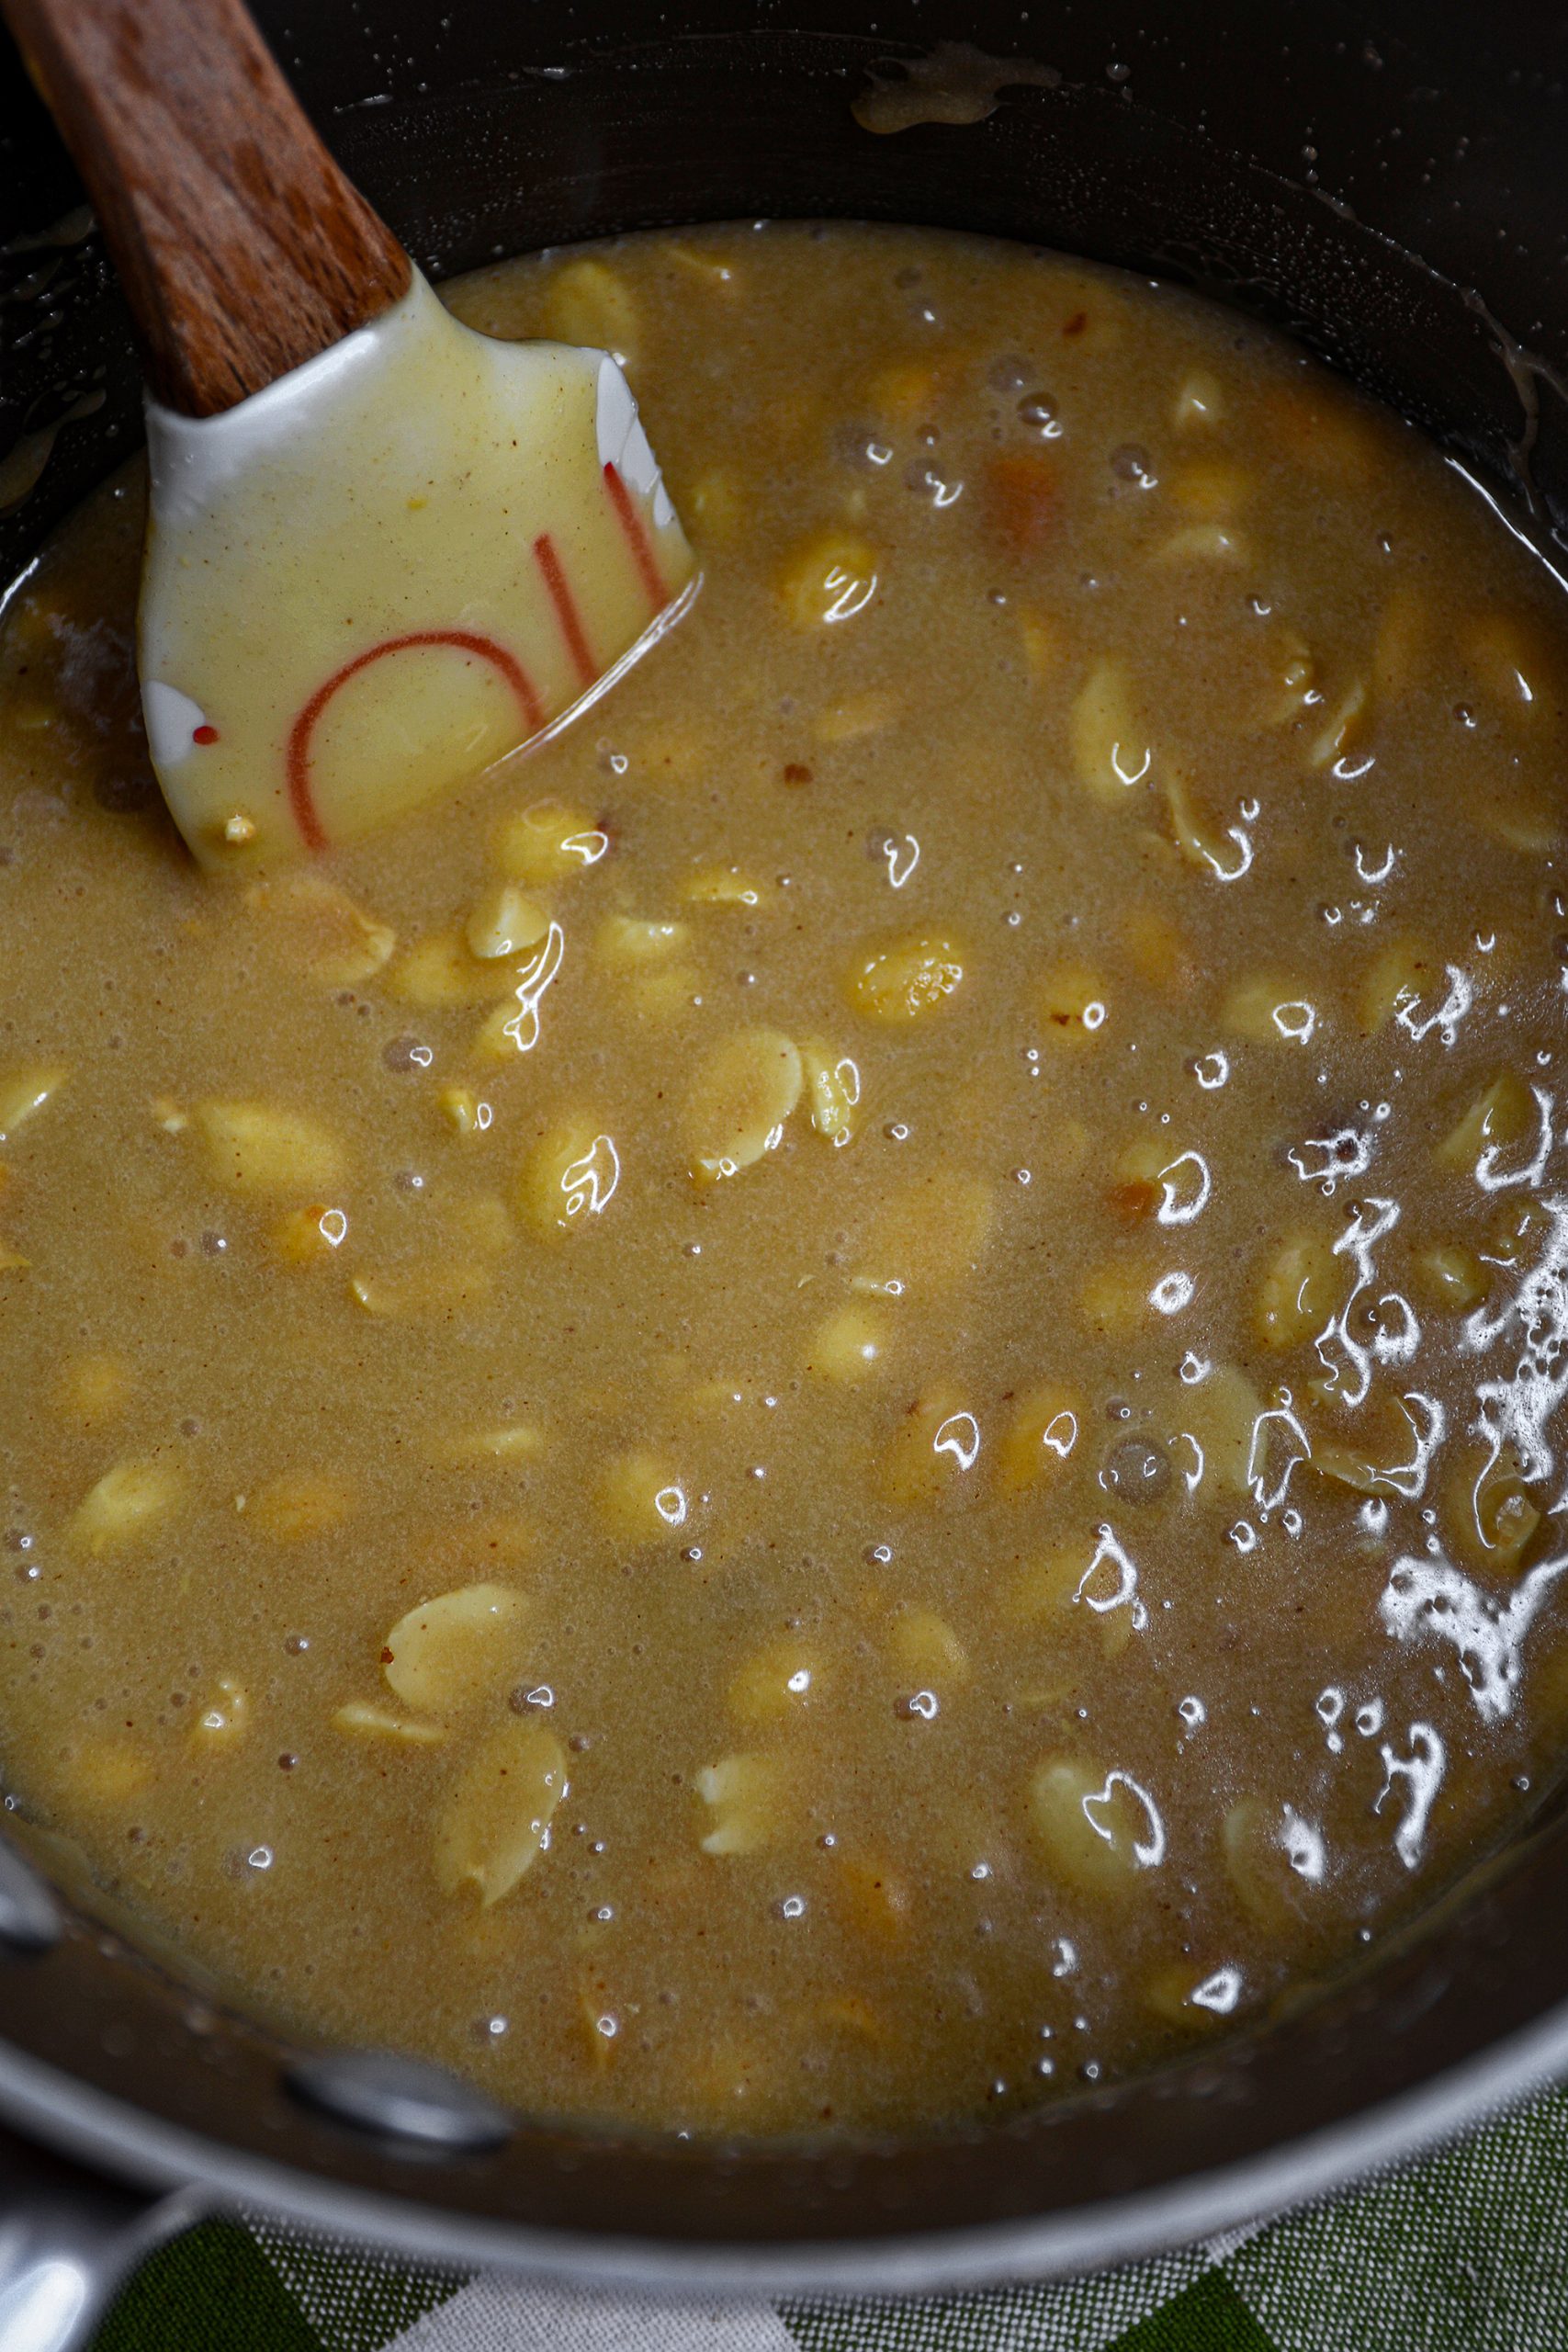 With a rubber spatula stir in the peanuts and cook for an additional 10 minutes constantly stirring.